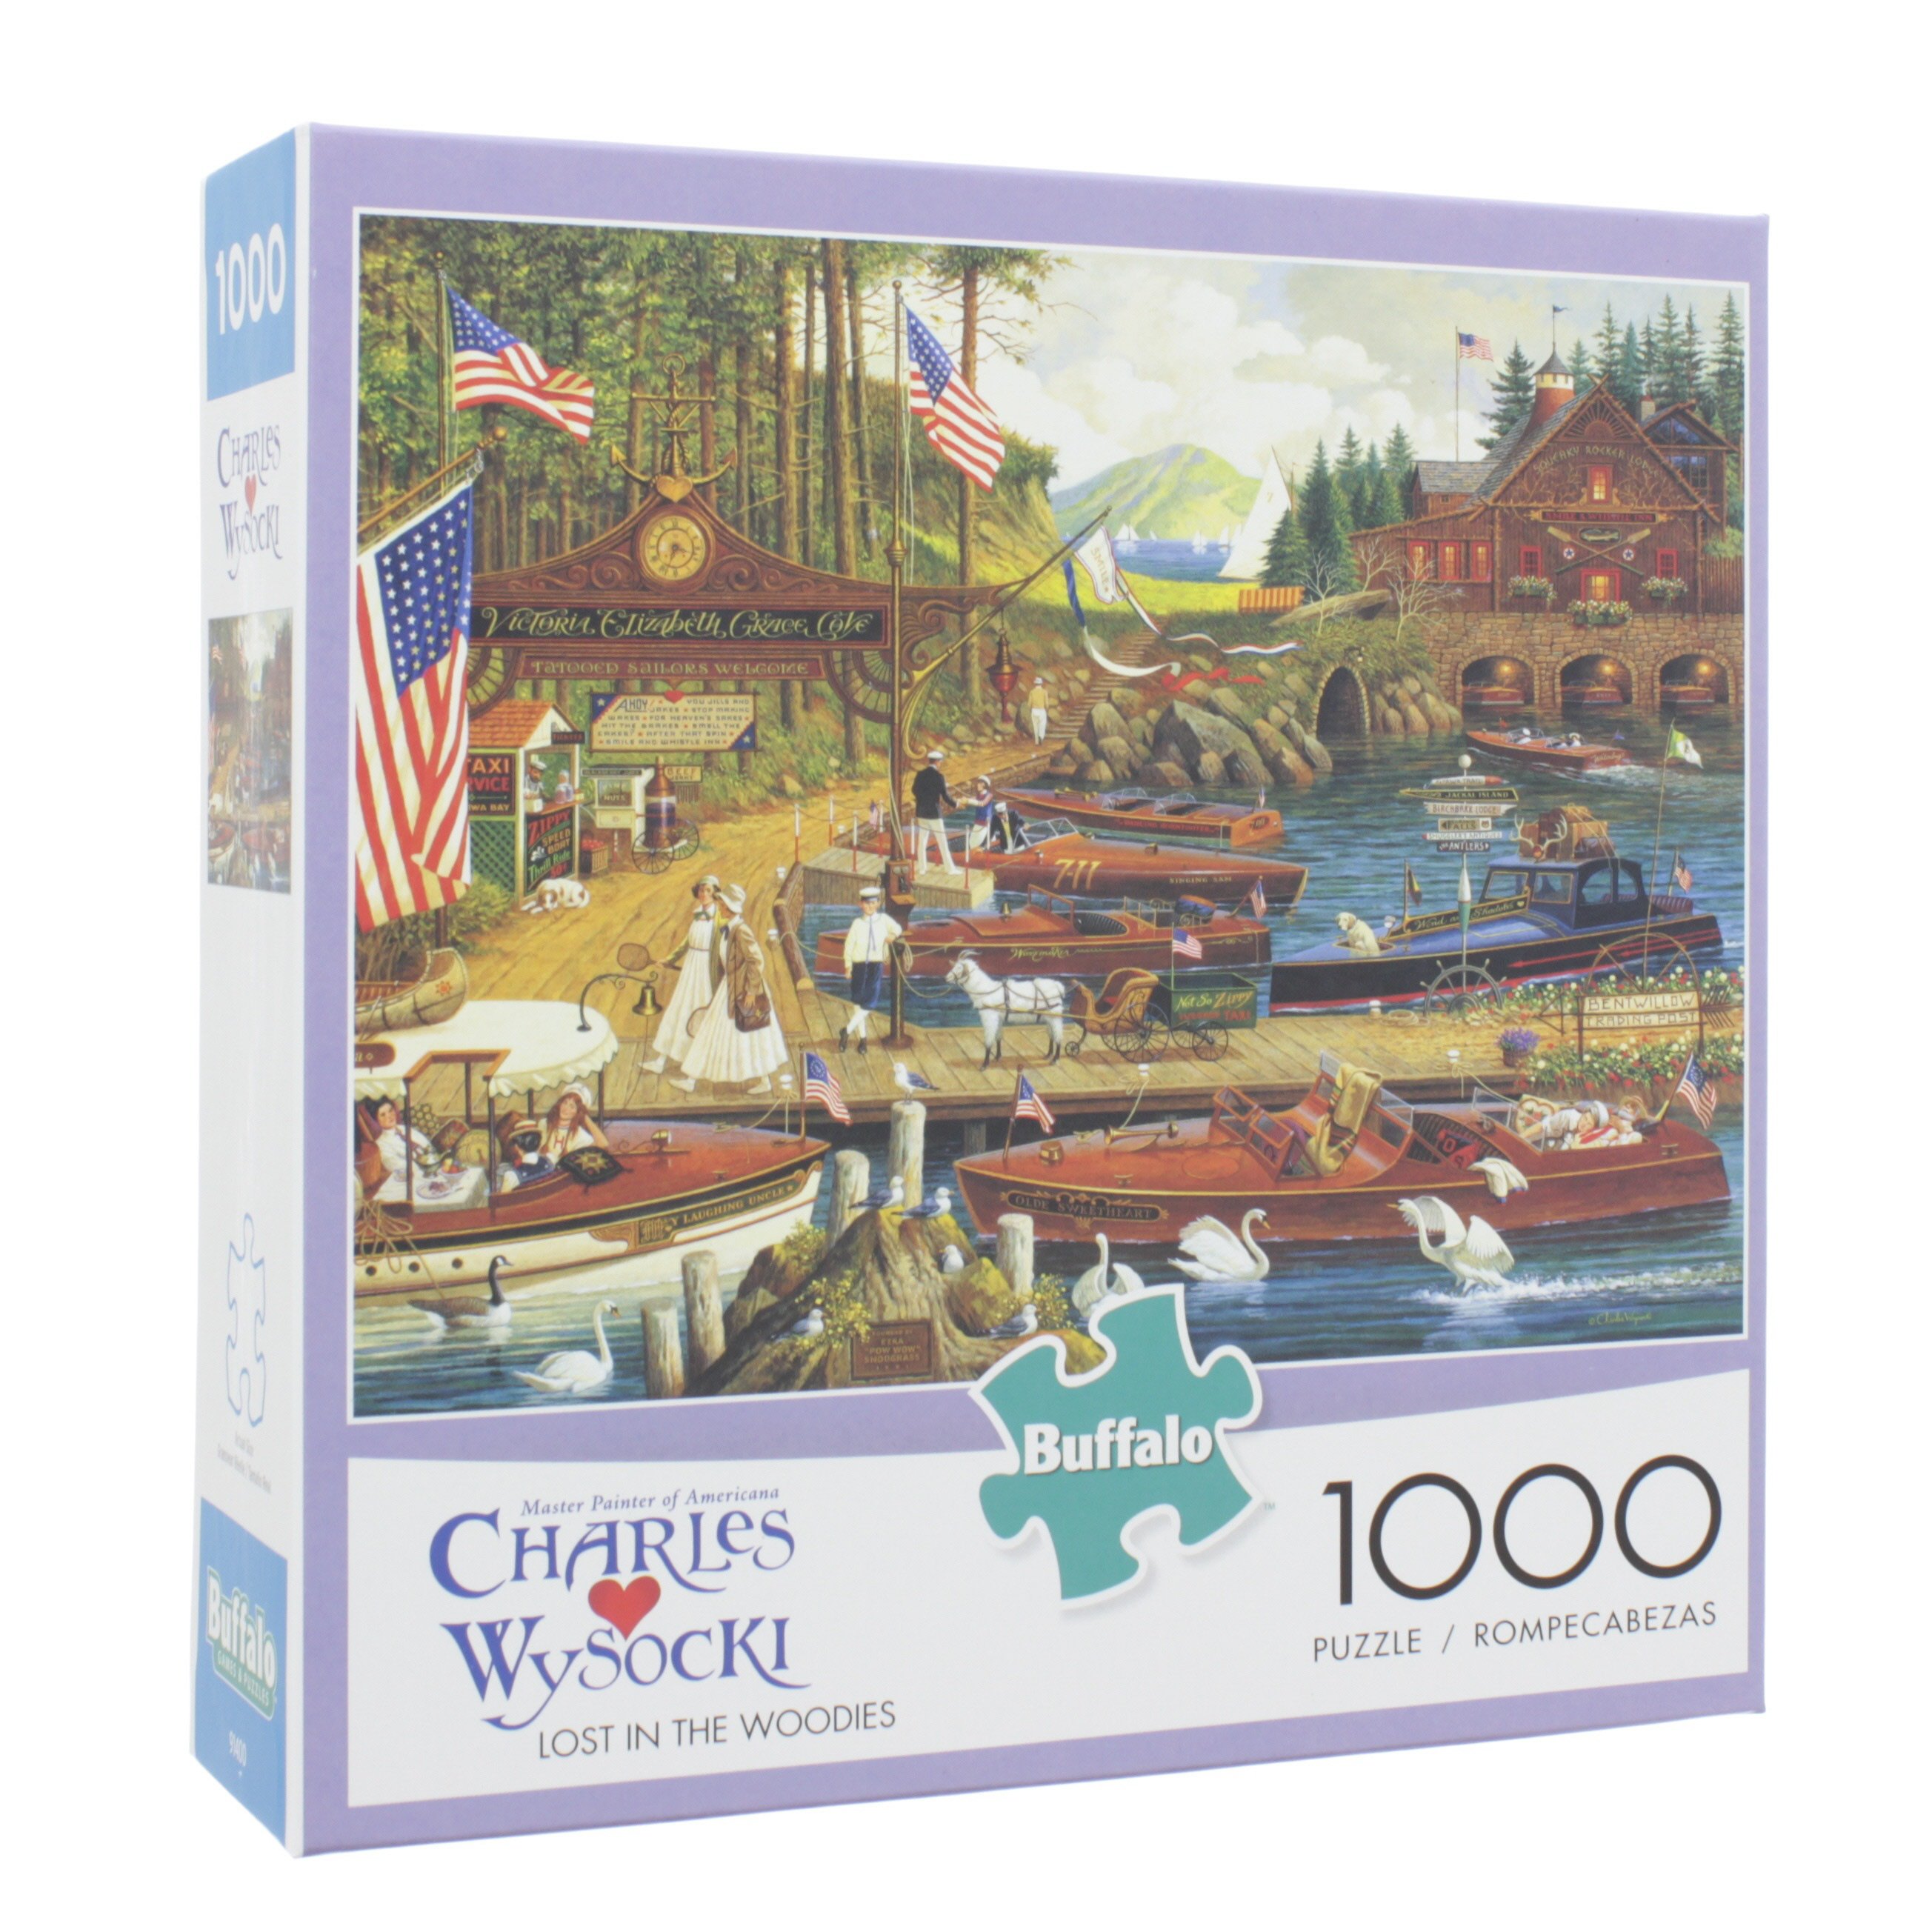 Charles Wysocki Lost in The Woodies 1000 PC Puzzle Bagged Buffalo Games for sale online 